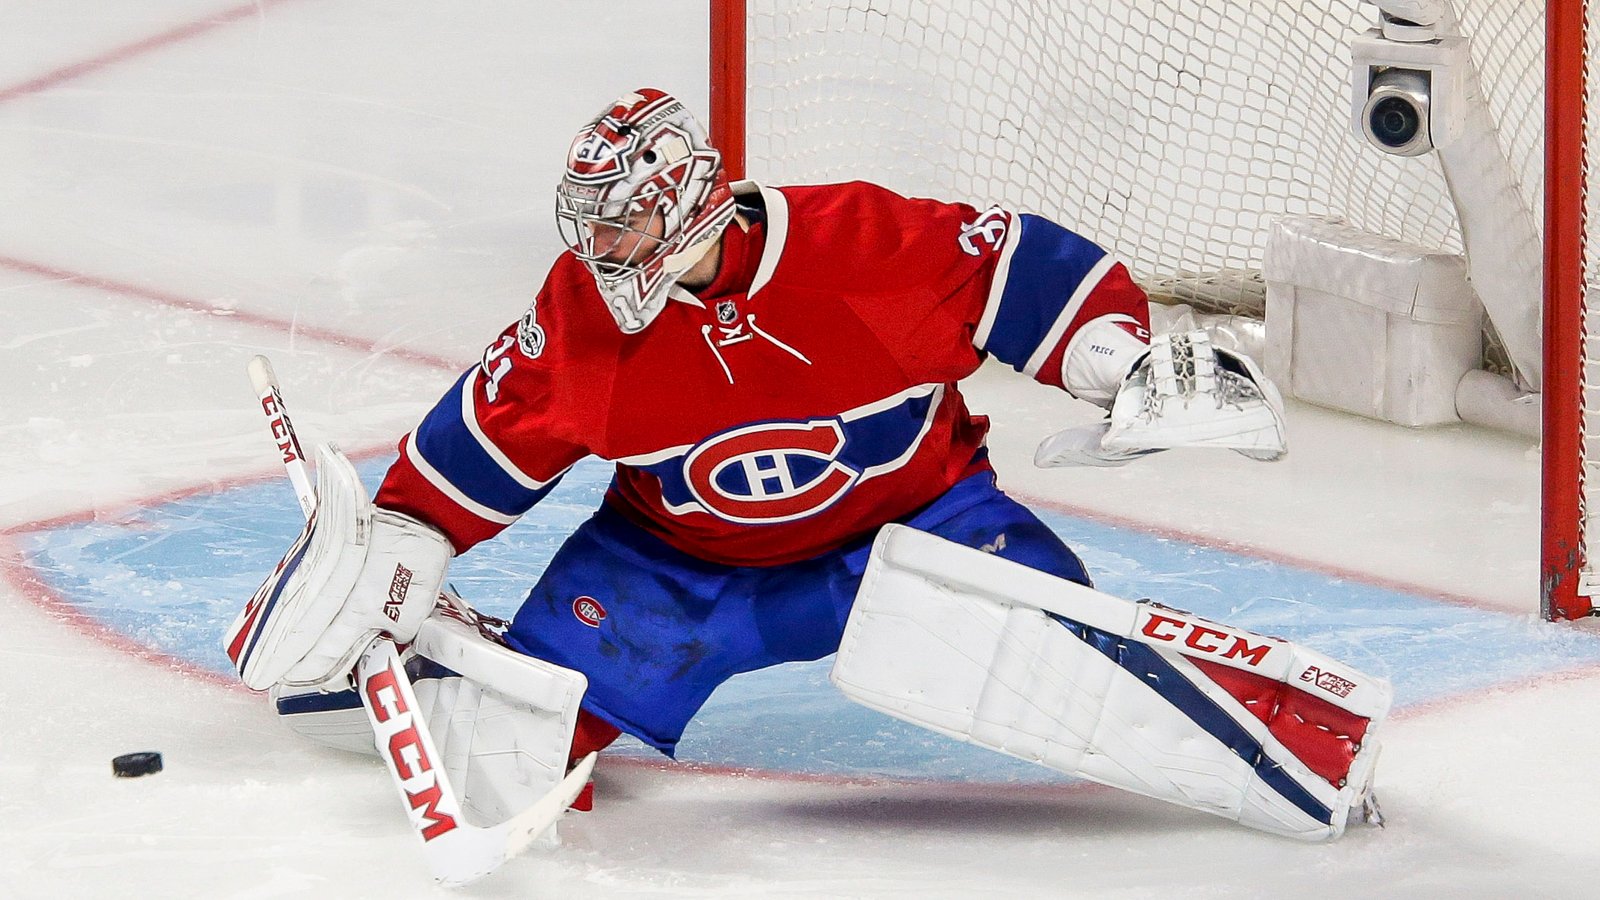 Breaking: Carey Price reveals he suffered from a potentially disabling illness this season